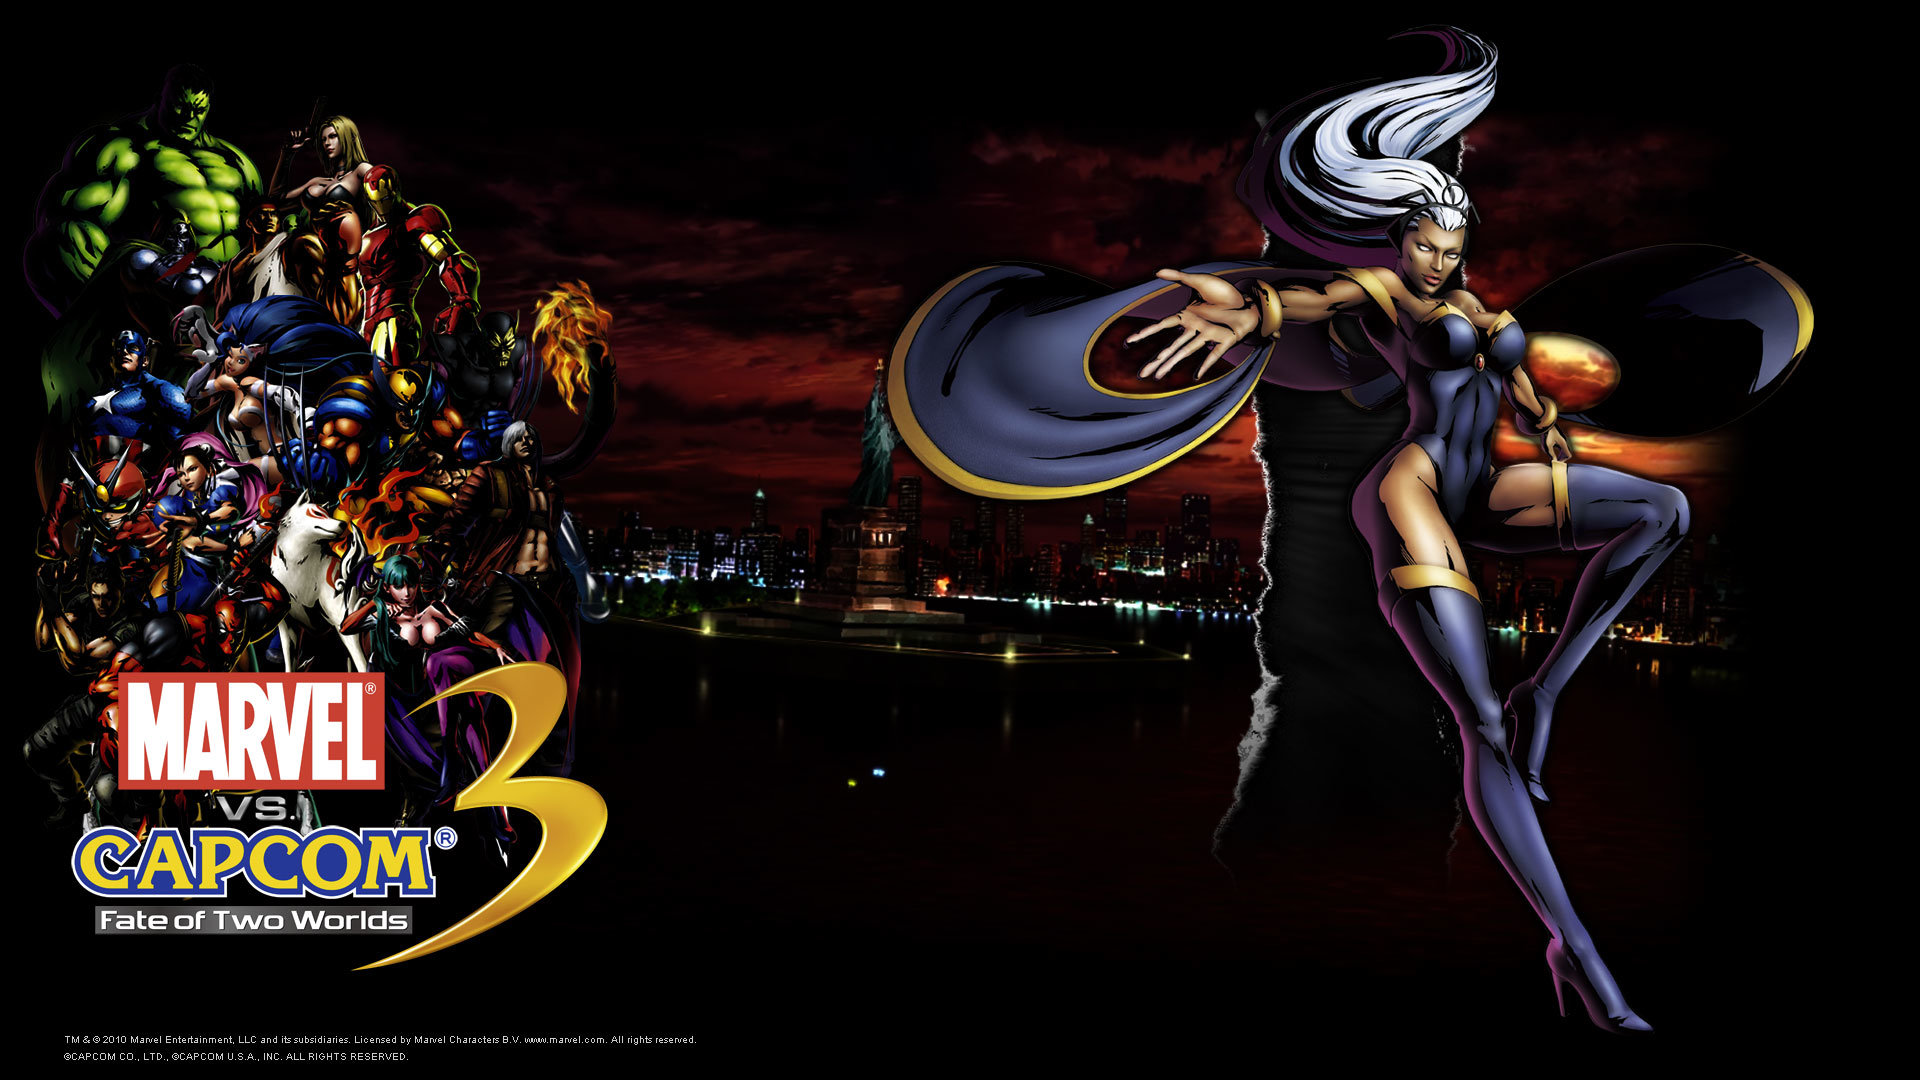 Best Marvel Vs. Capcom 3: Fate Of Two Worlds wallpaper ID:298406 for High Resolution hd 1080p computer